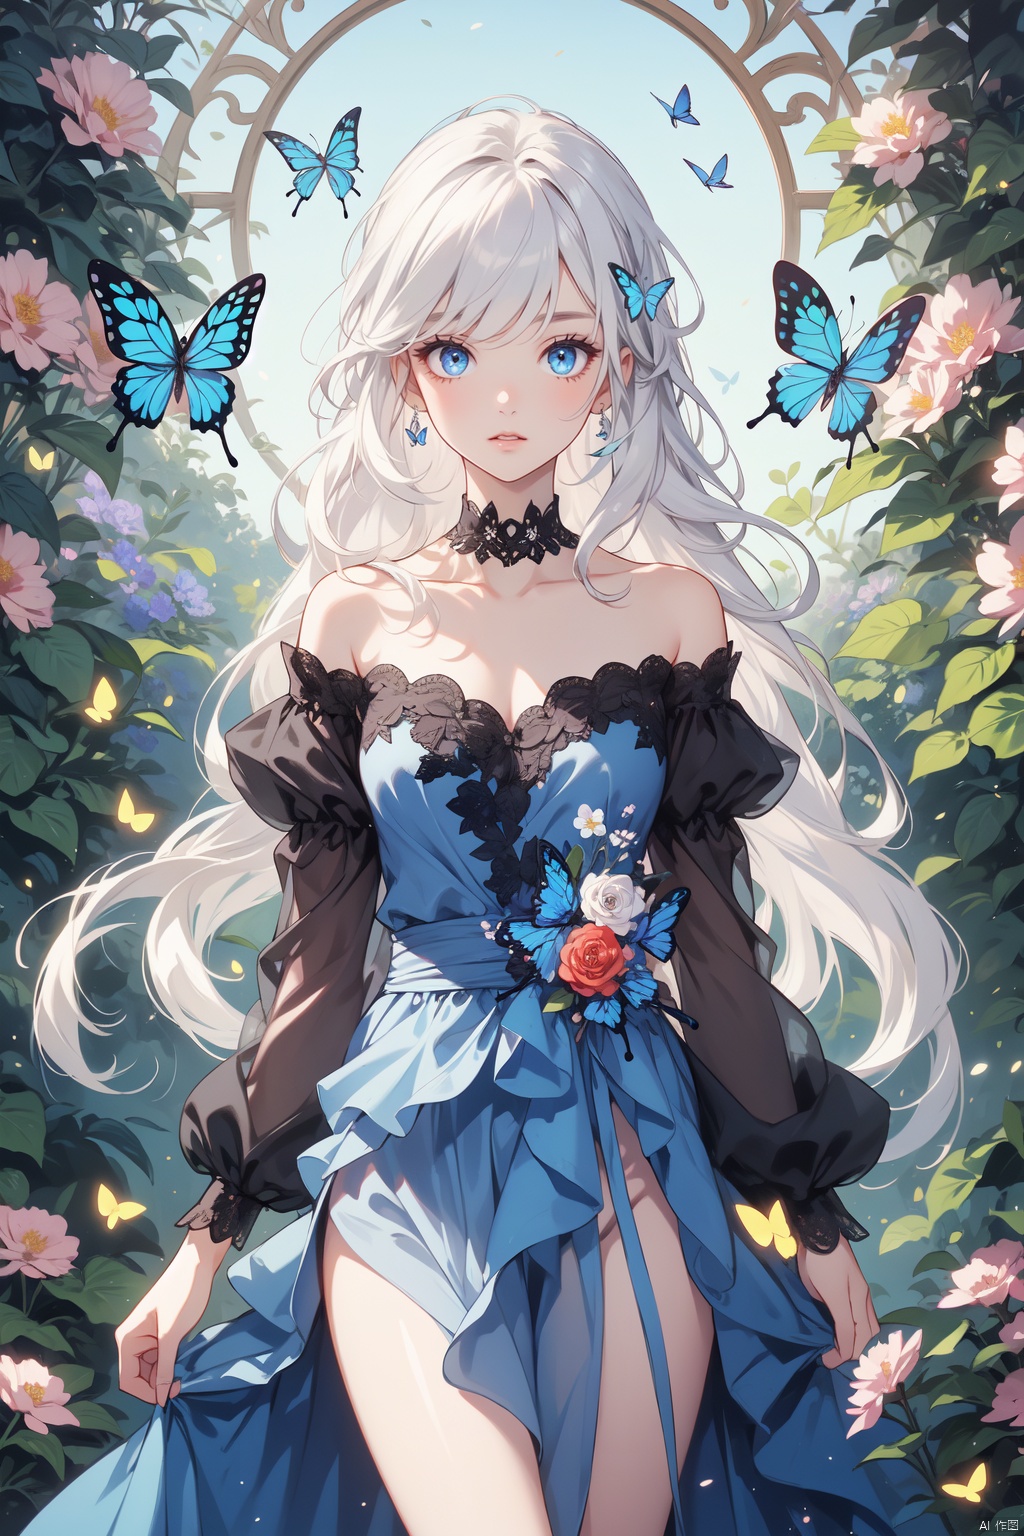  night,glowing eyes,gothic,long dress, 1 girl, solo, long white hair, blue eyes, detailed eyes, blink and youll miss it detail,butterfly, flower garden, high quality, floral background, very detailed,off shoulder